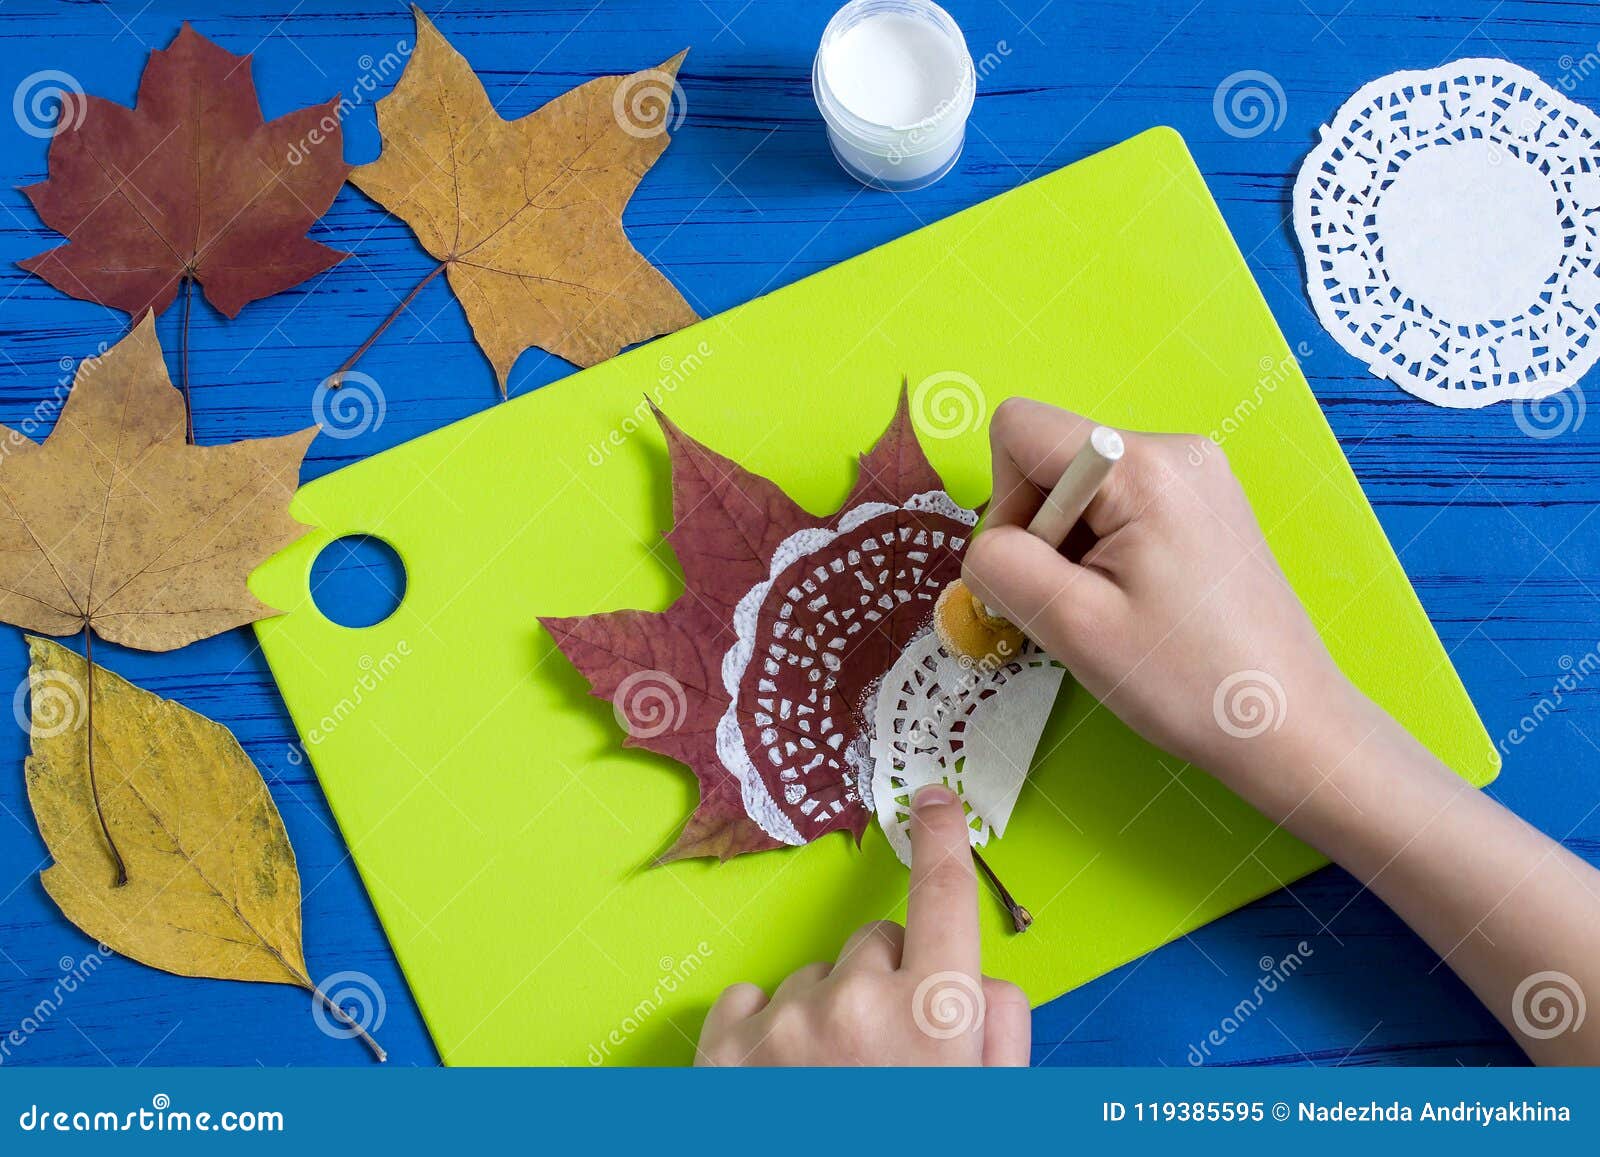 DIY Paper dried leaves for fall crafts (how to make paper